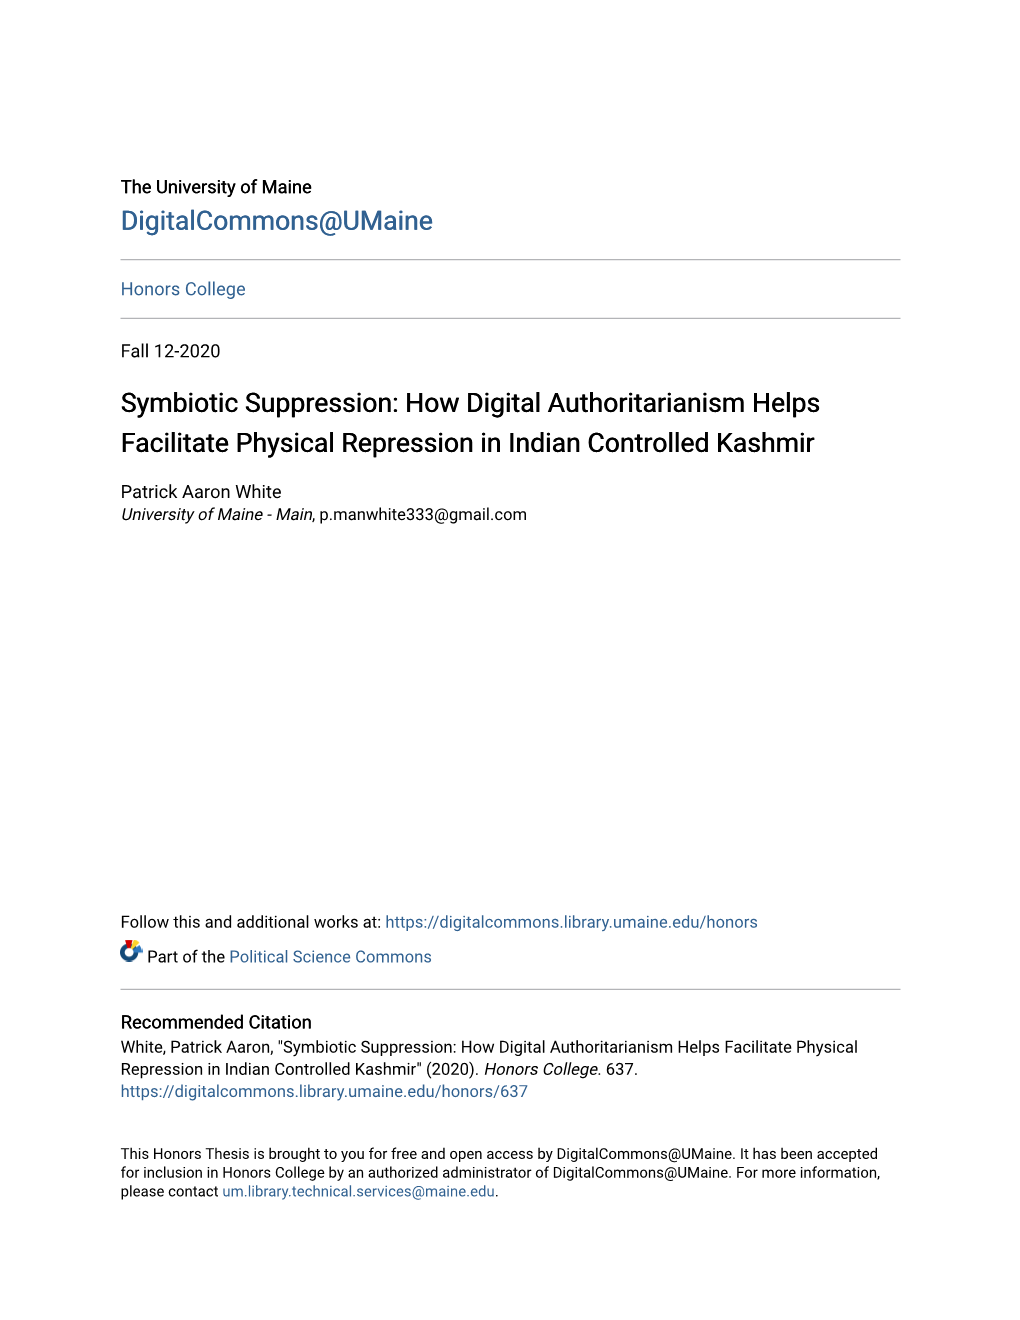 Symbiotic Suppression: How Digital Authoritarianism Helps Facilitate Physical Repression in Indian Controlled Kashmir